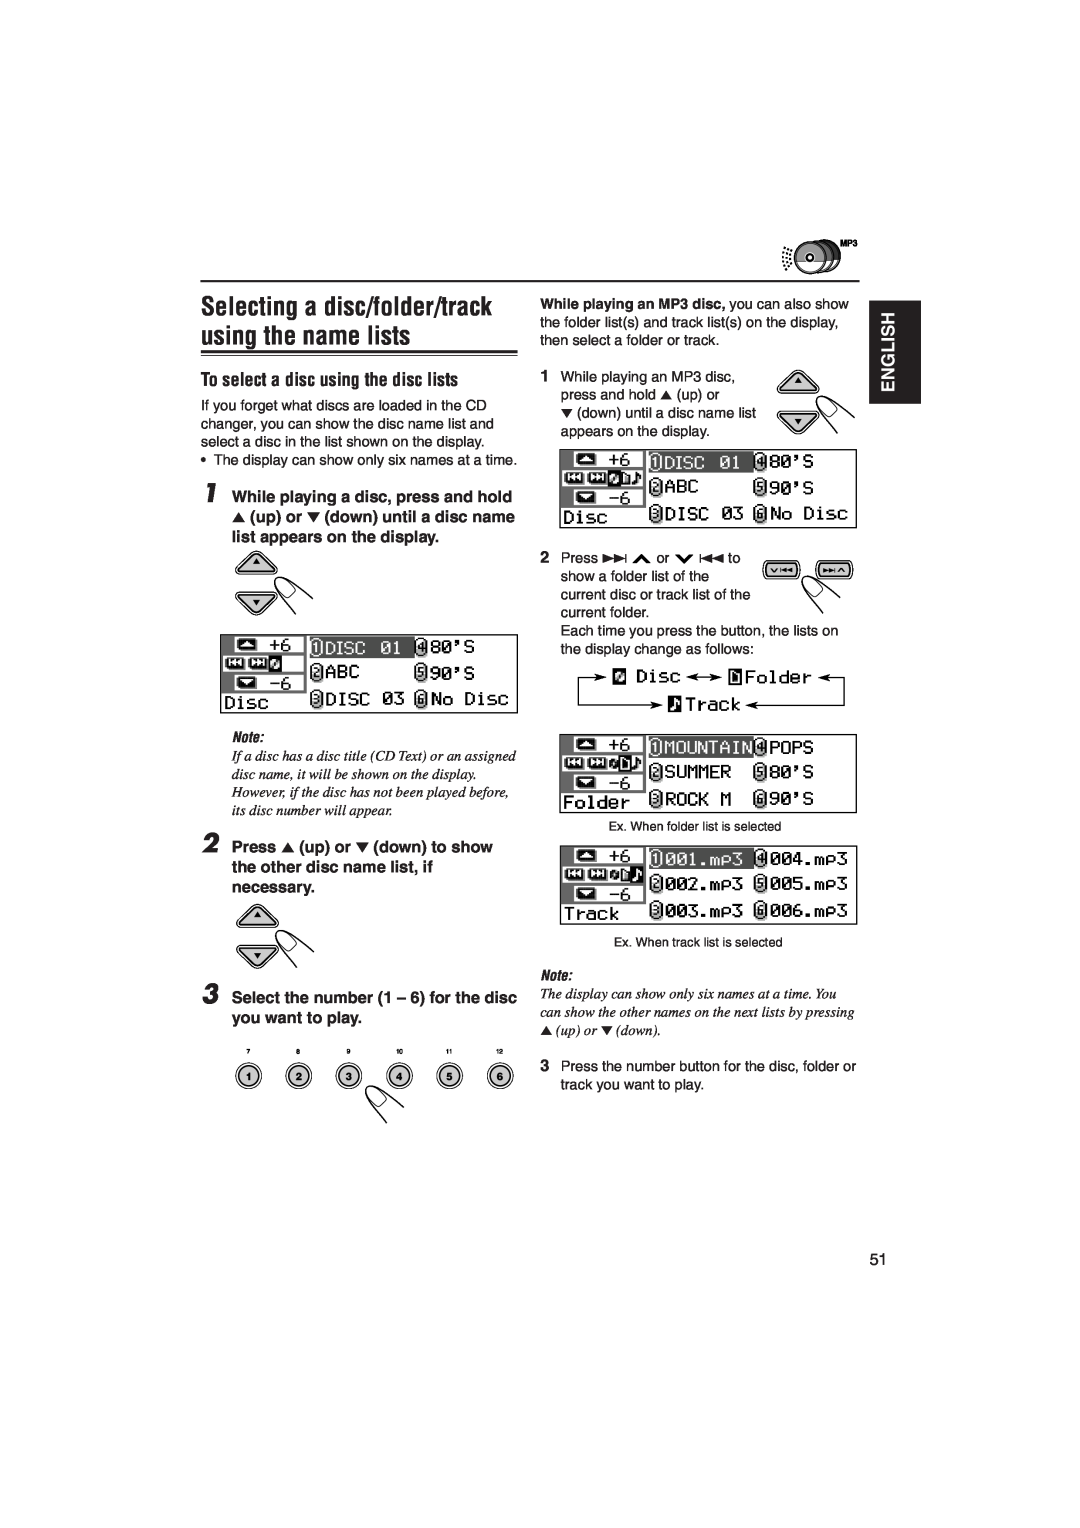 JVC KD-SH9105 manual To select a disc using the disc lists, English, While playing a disc, press and hold 